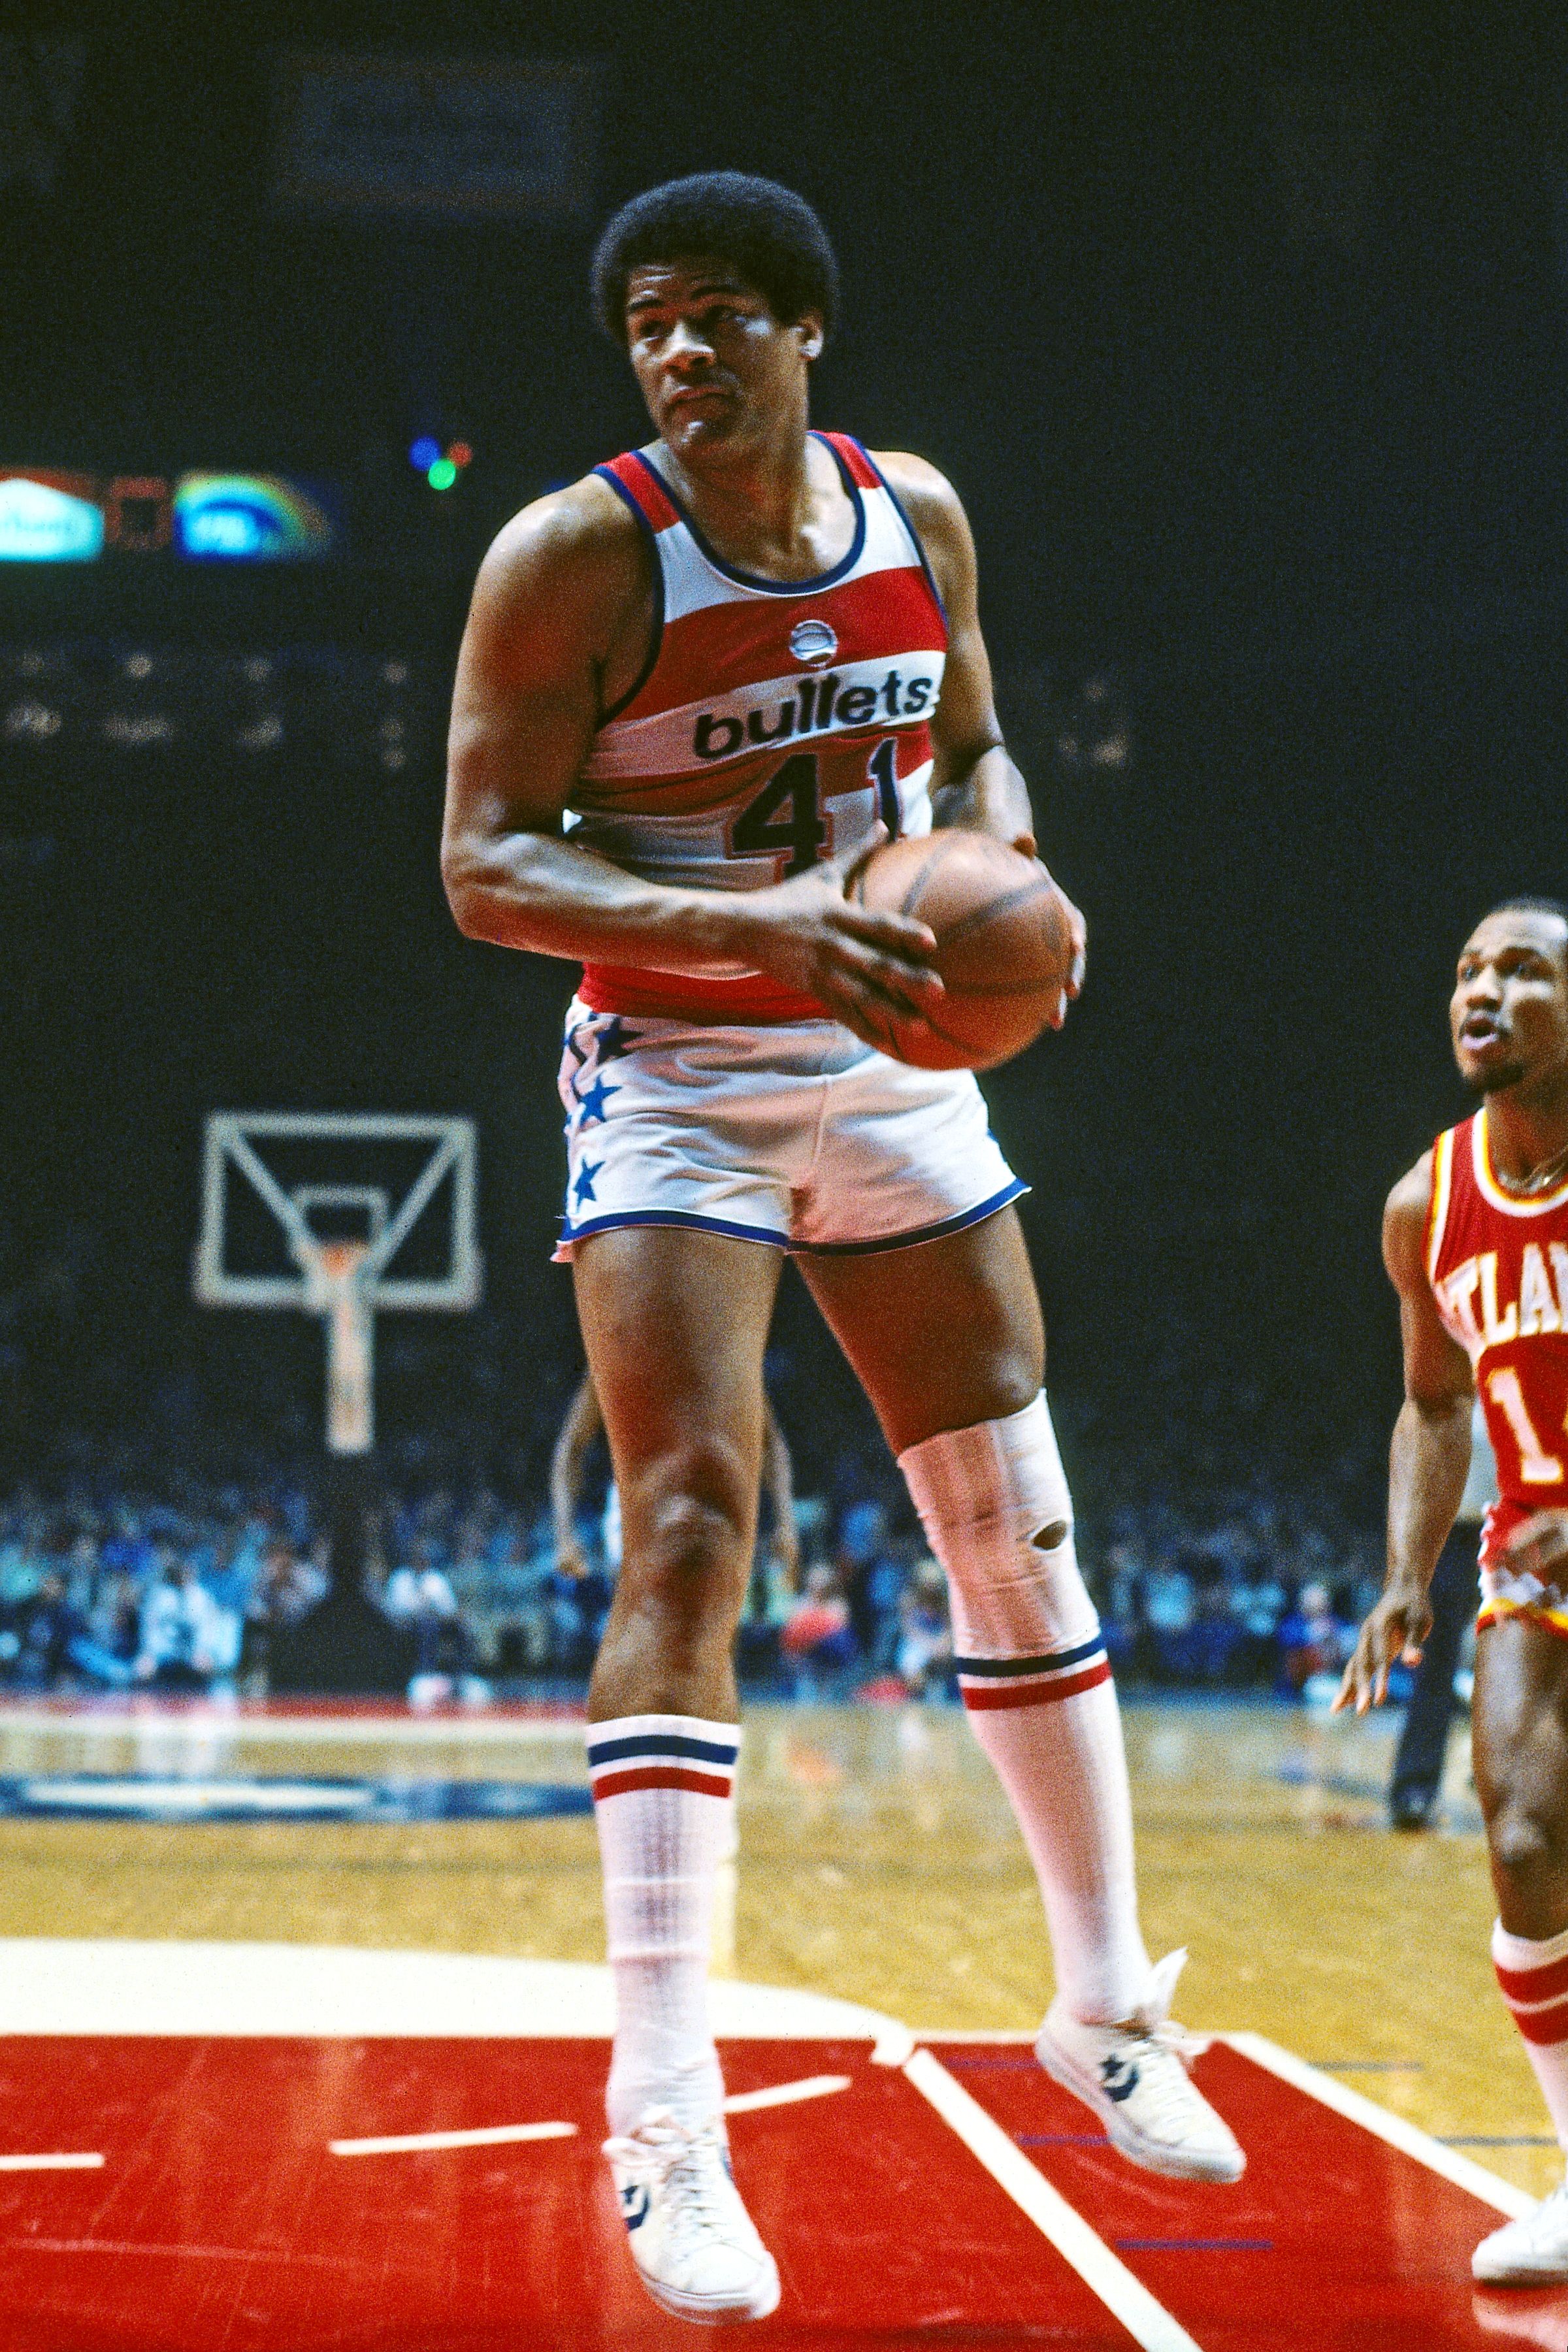 NBA 75: At No. 60, Wes Unseld brought force and an uncompromising